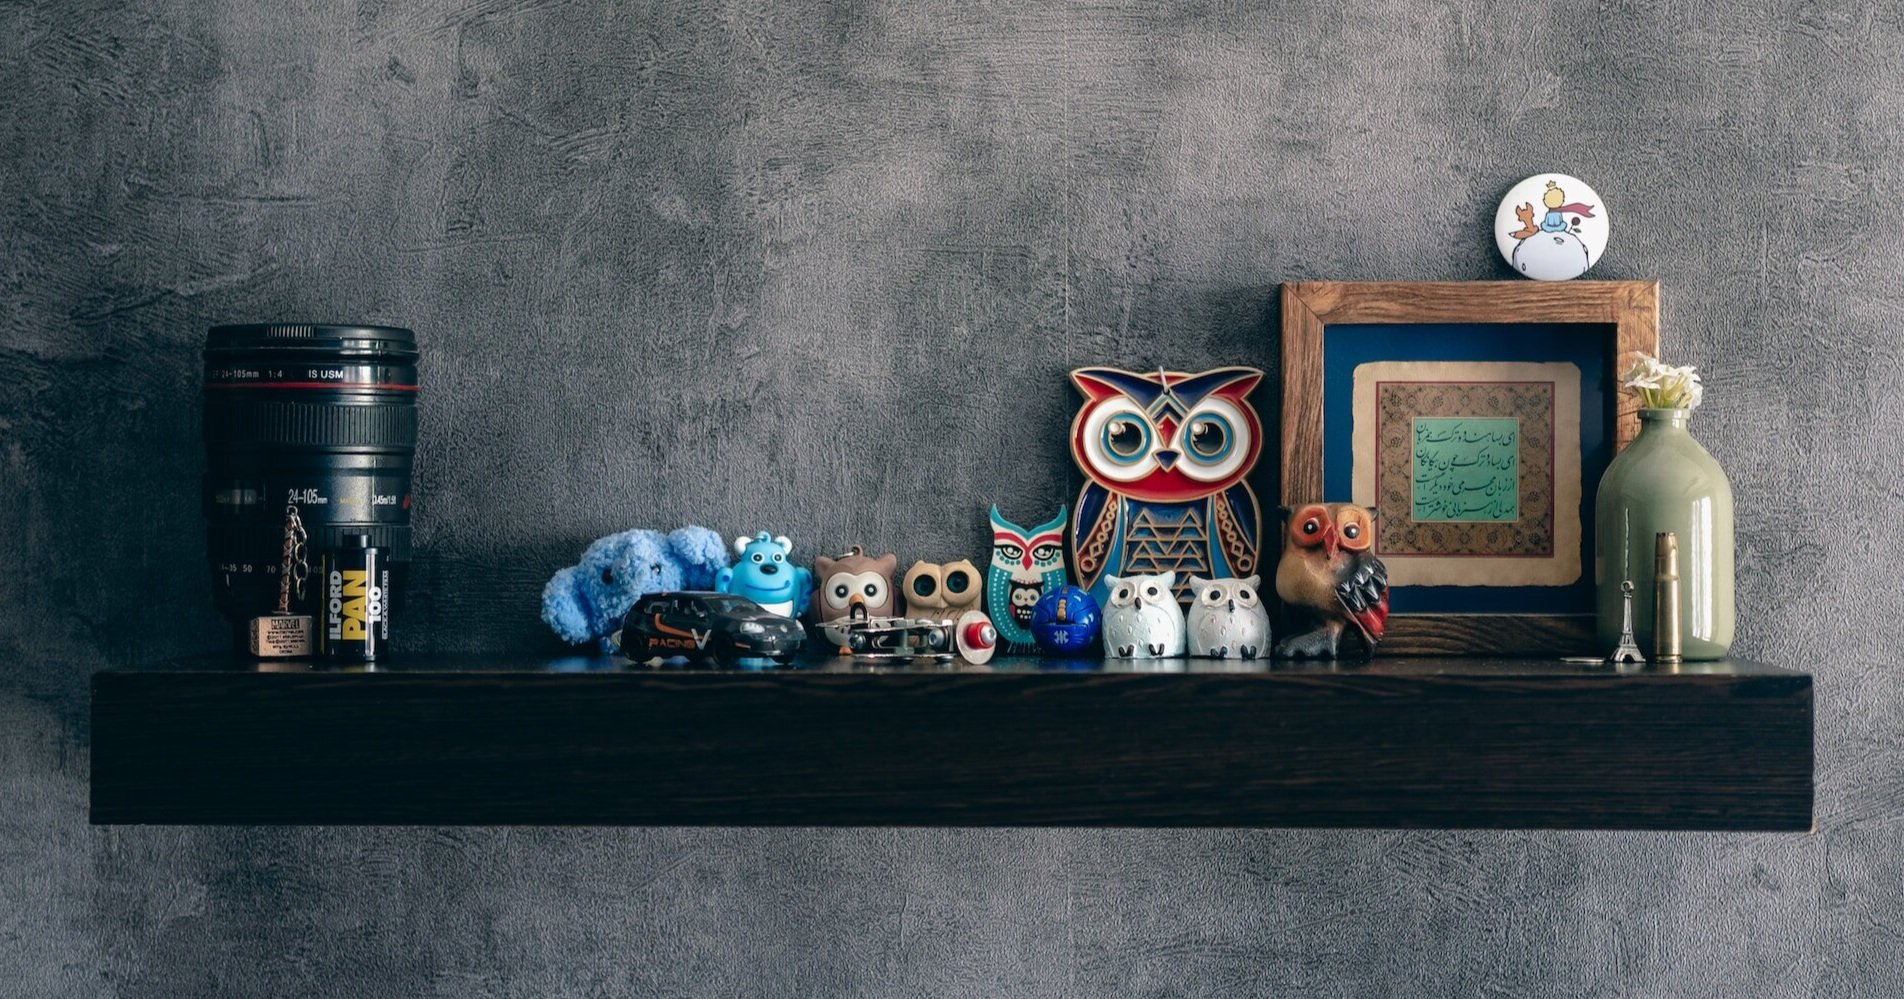 A captivating display of owl themed decor including small figurine